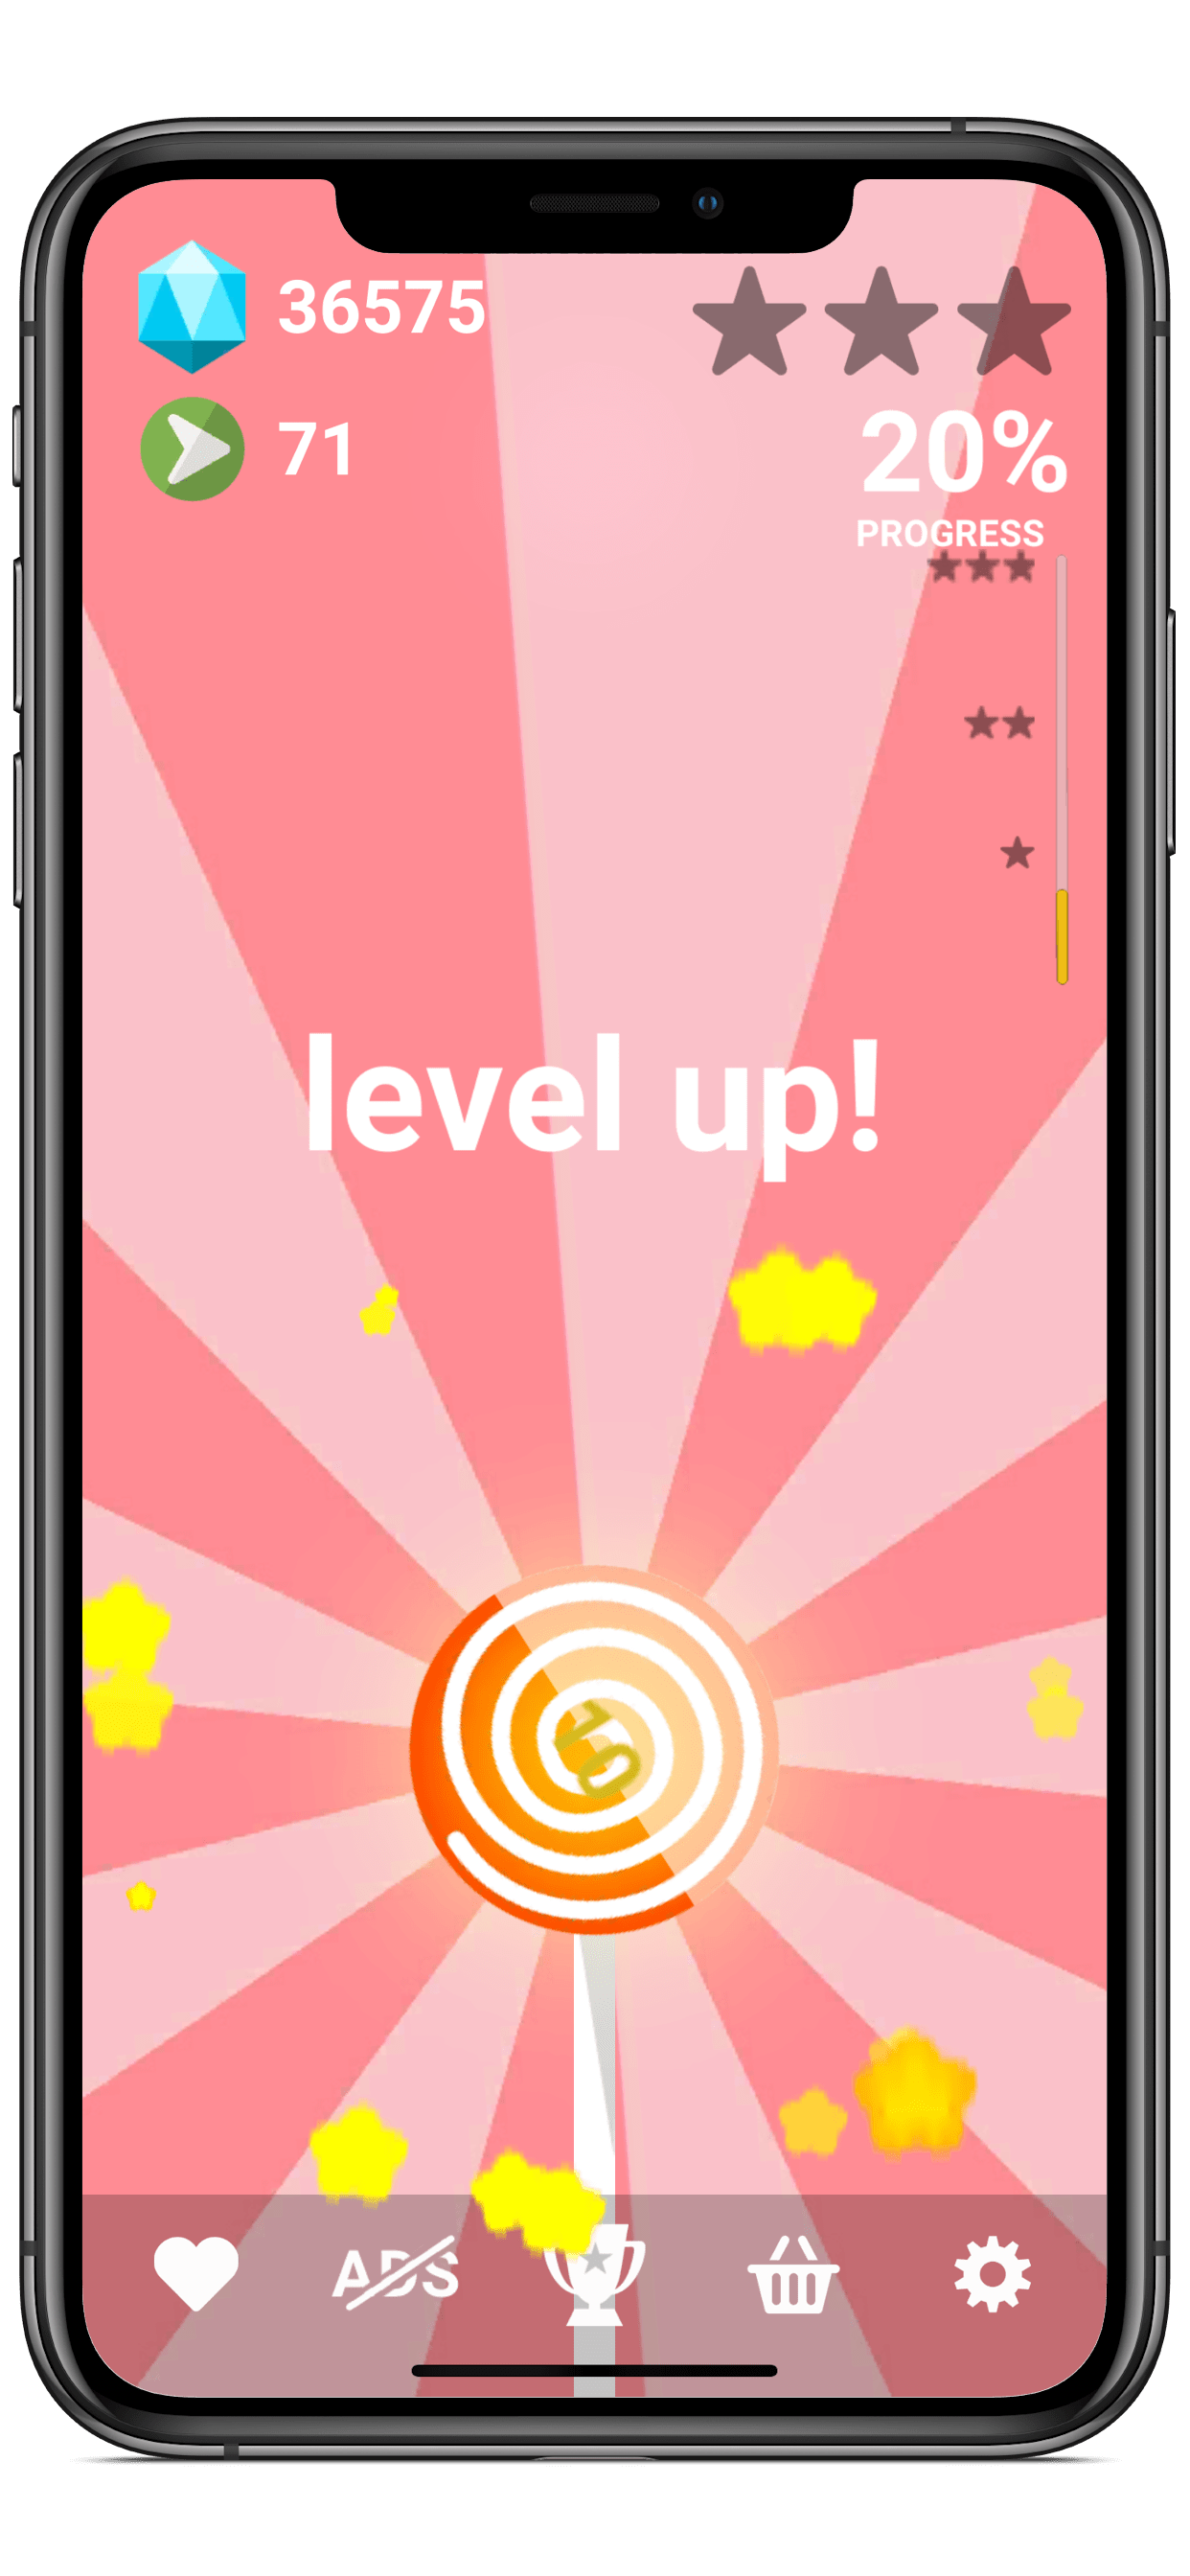 4 12 SWIRLY free game for Android, iOS, Windows - drop and match things, save farm animals, destroy planets, feel like on the beach